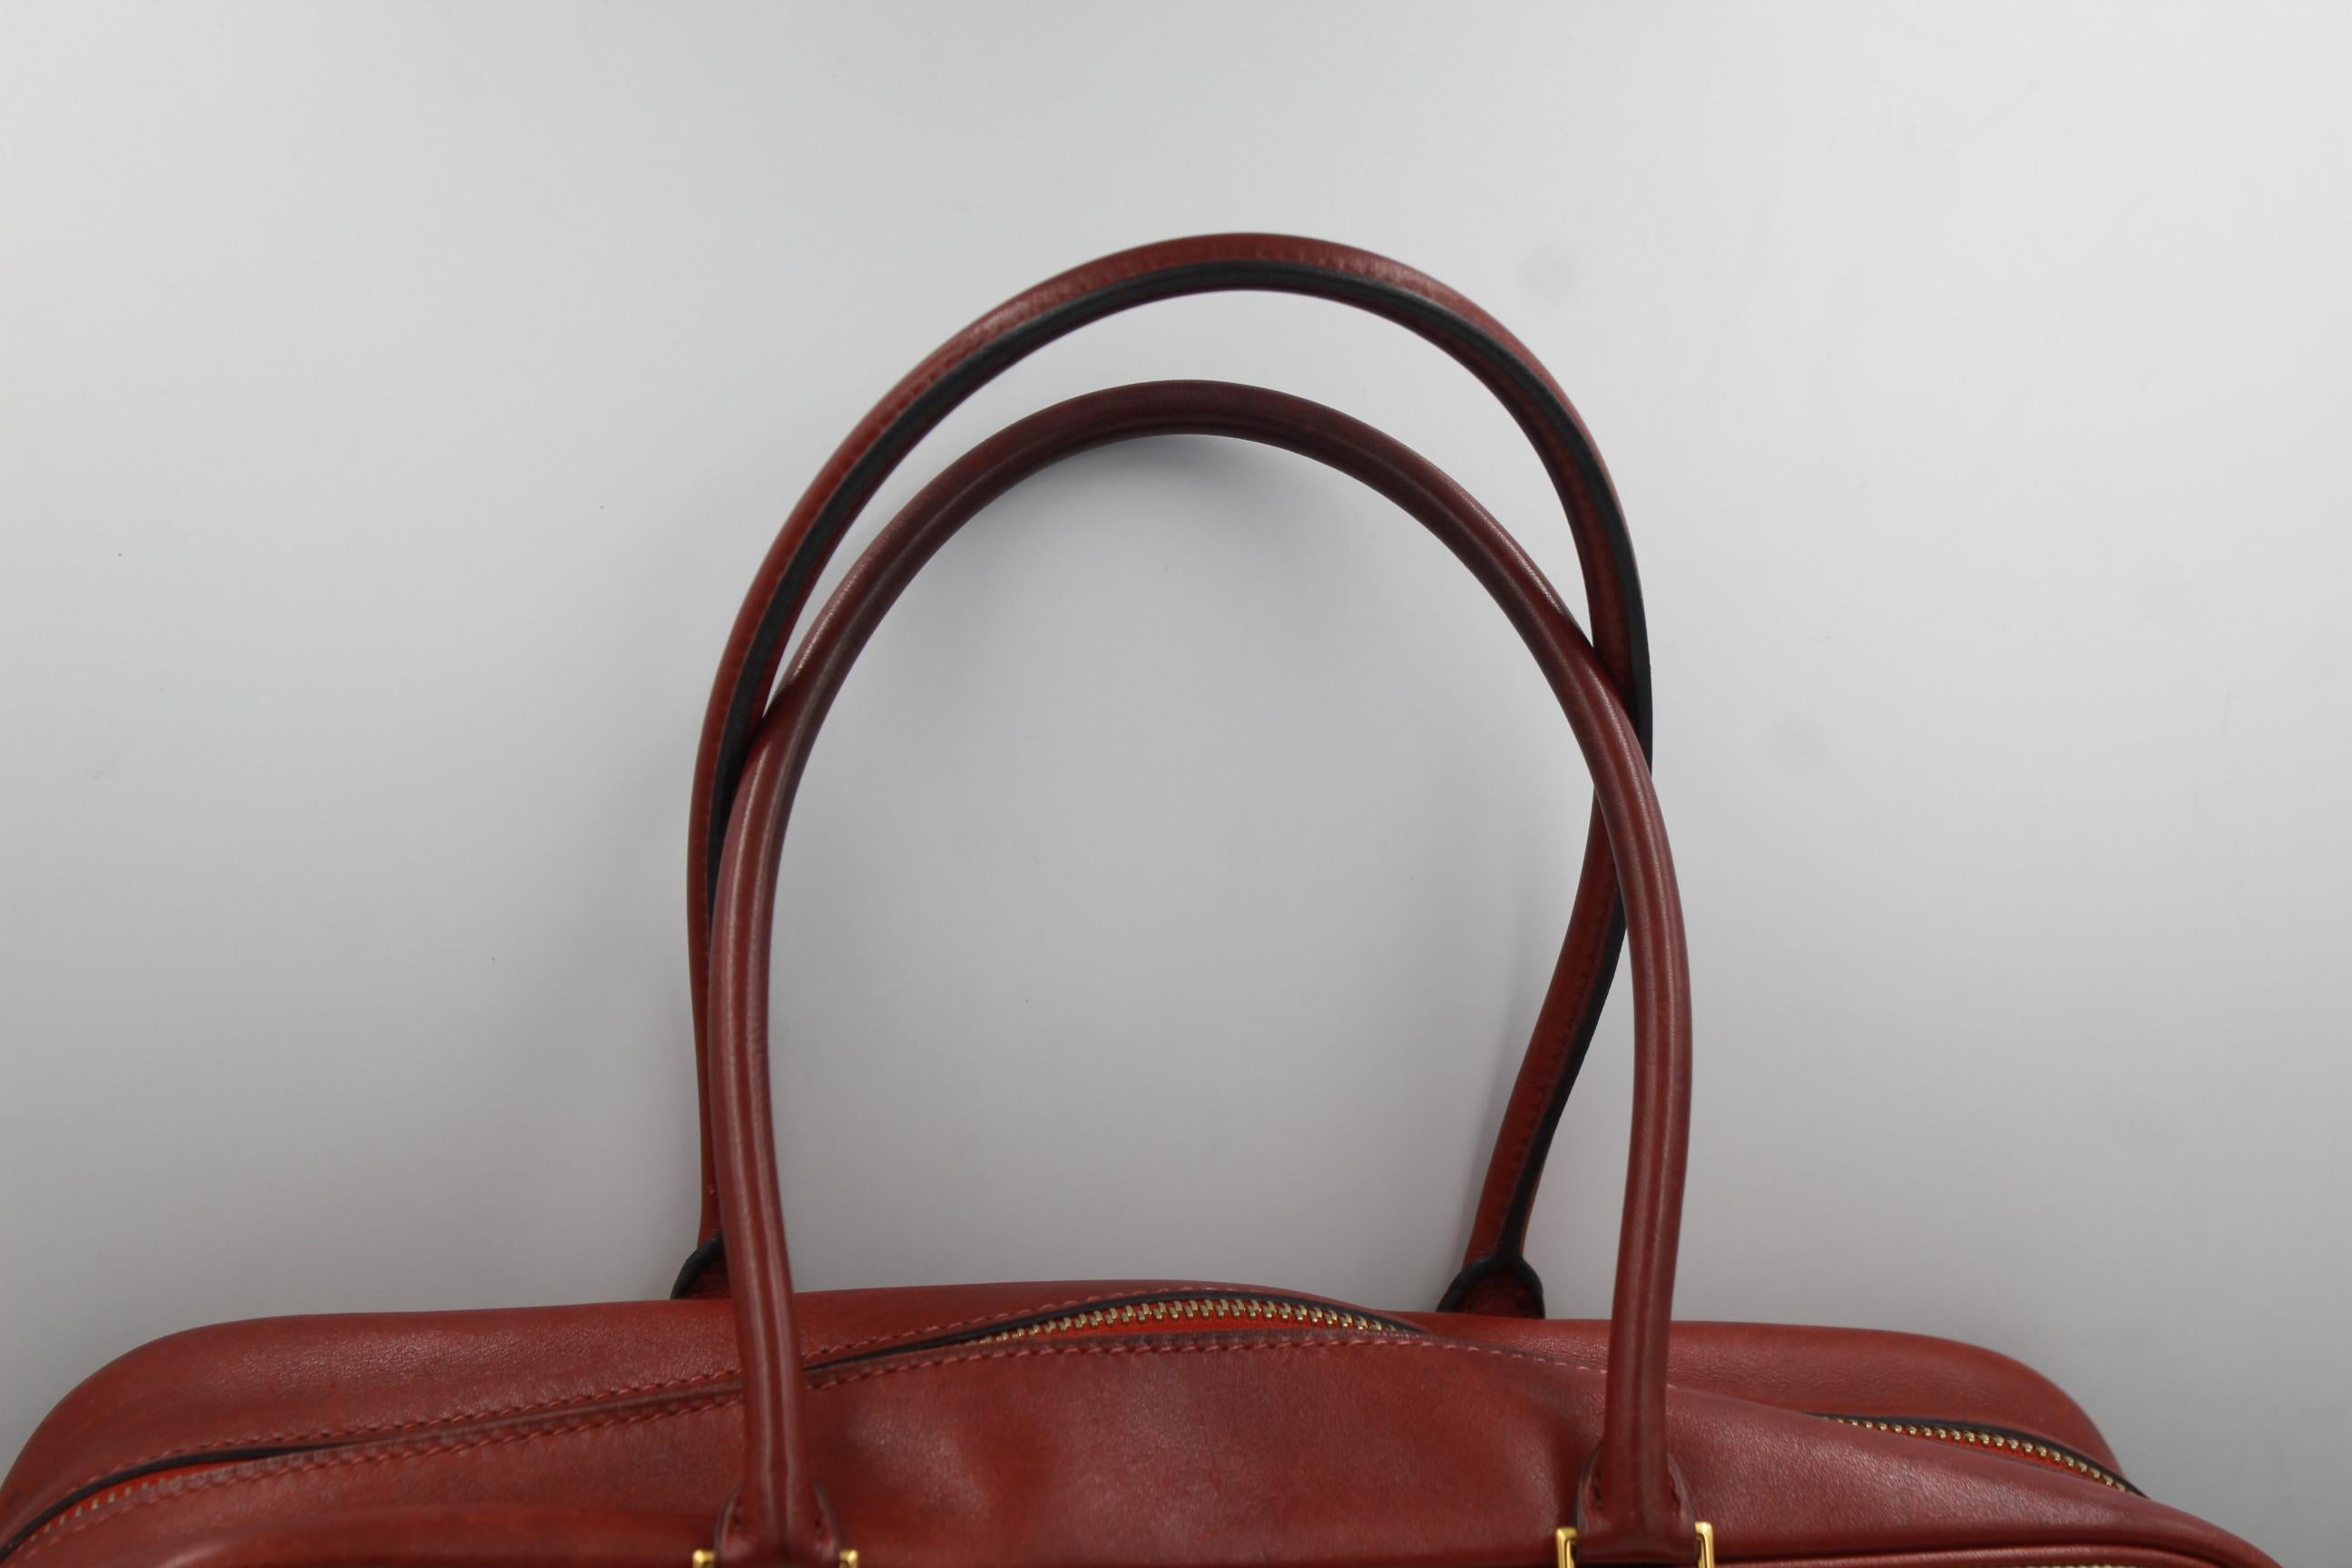 Hermes Plume 32 in Dark Red Leather and Canvas (Grau)